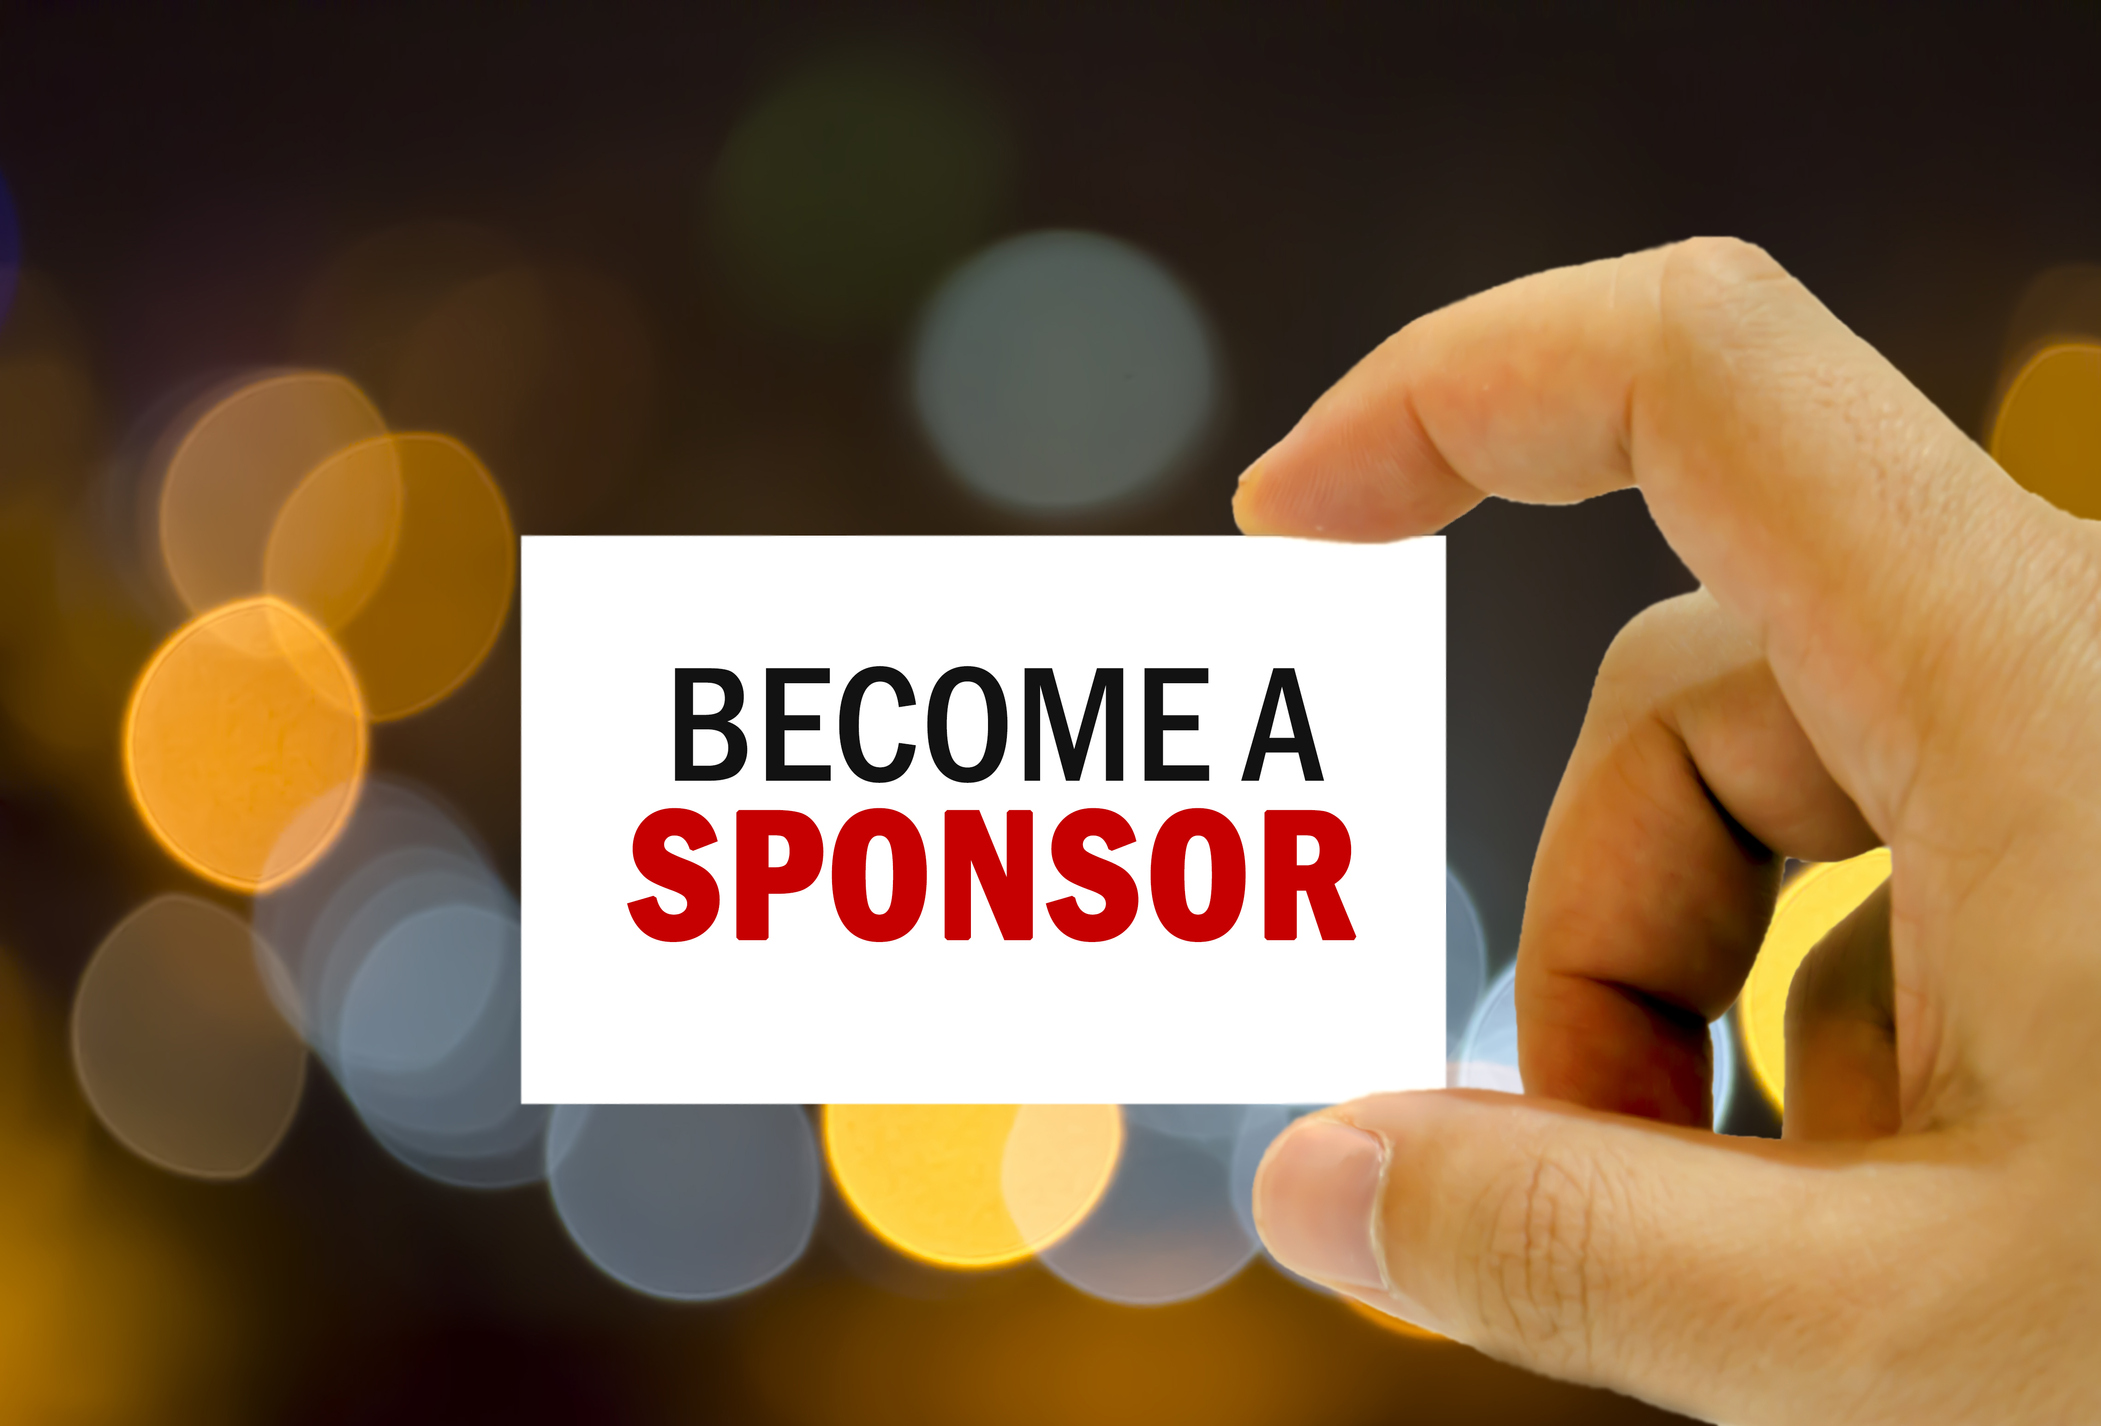 'become a sponsor' written on business card